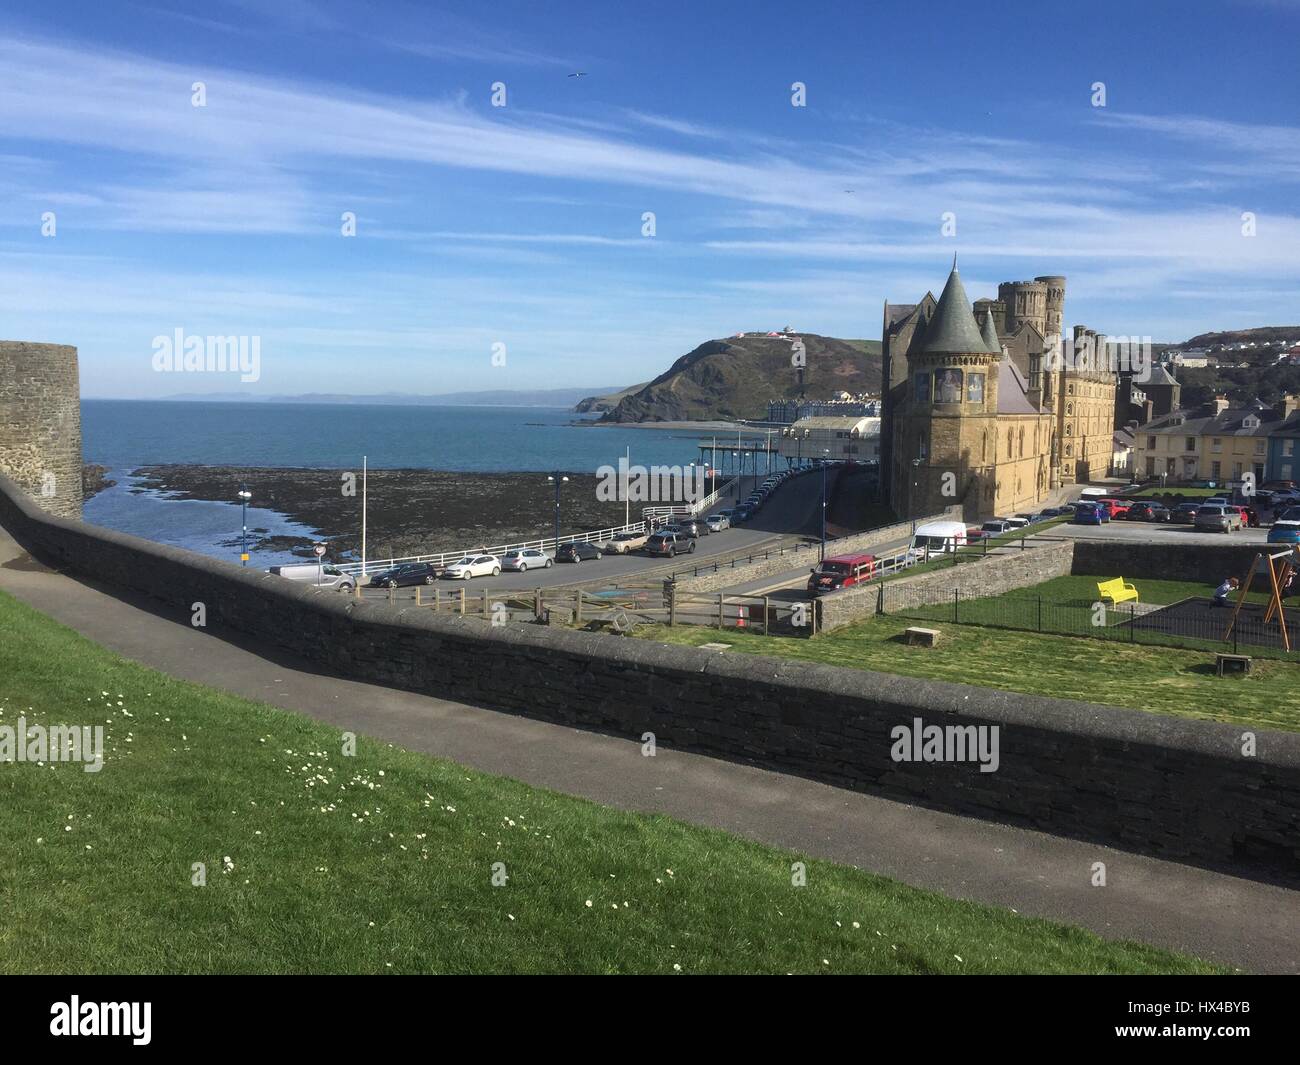 Aberystwyth, Wales UK, Saturday 25 March 2017 UK weather: A day of glorious sunshine and clear blue skies in Aberystwyth on the west wales coast, with temperatures expected to reach 18 or 19ºc by the afternoon. Sheltered from the cooling effects of an easterly wind, West Wales is expected to be the warmest pace in the UK today Credit: keith morris/Alamy Live News Stock Photo